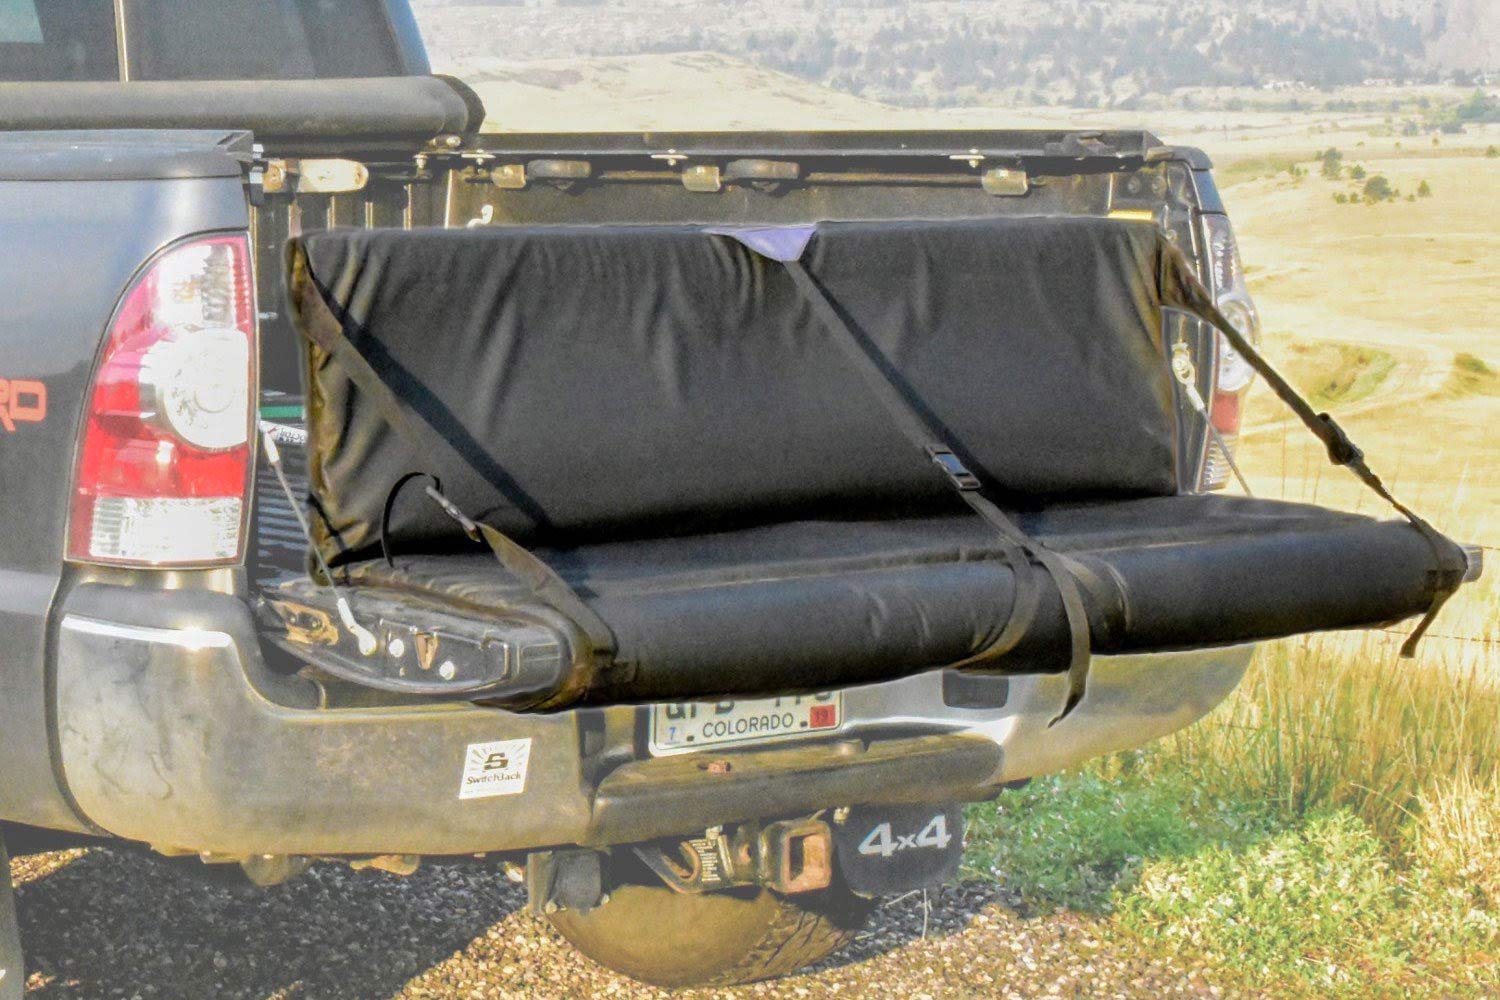 SwitchBack Tailgate Pads for trucks, with built-in seating